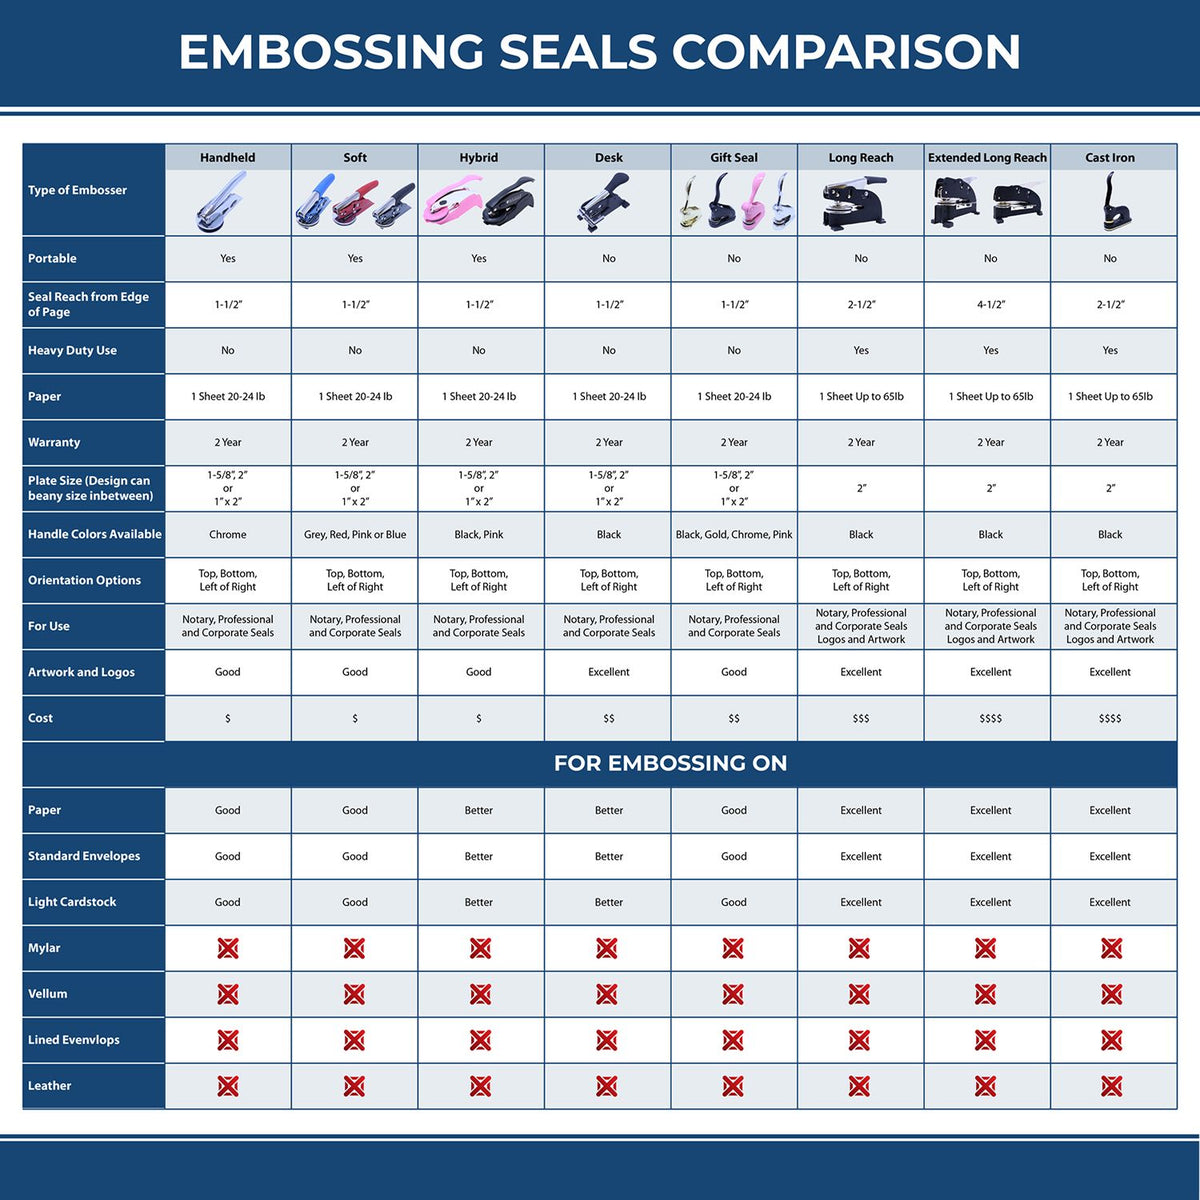 A comparison chart for the different types of mount models available for the Soft South Carolina Professional Geologist Seal